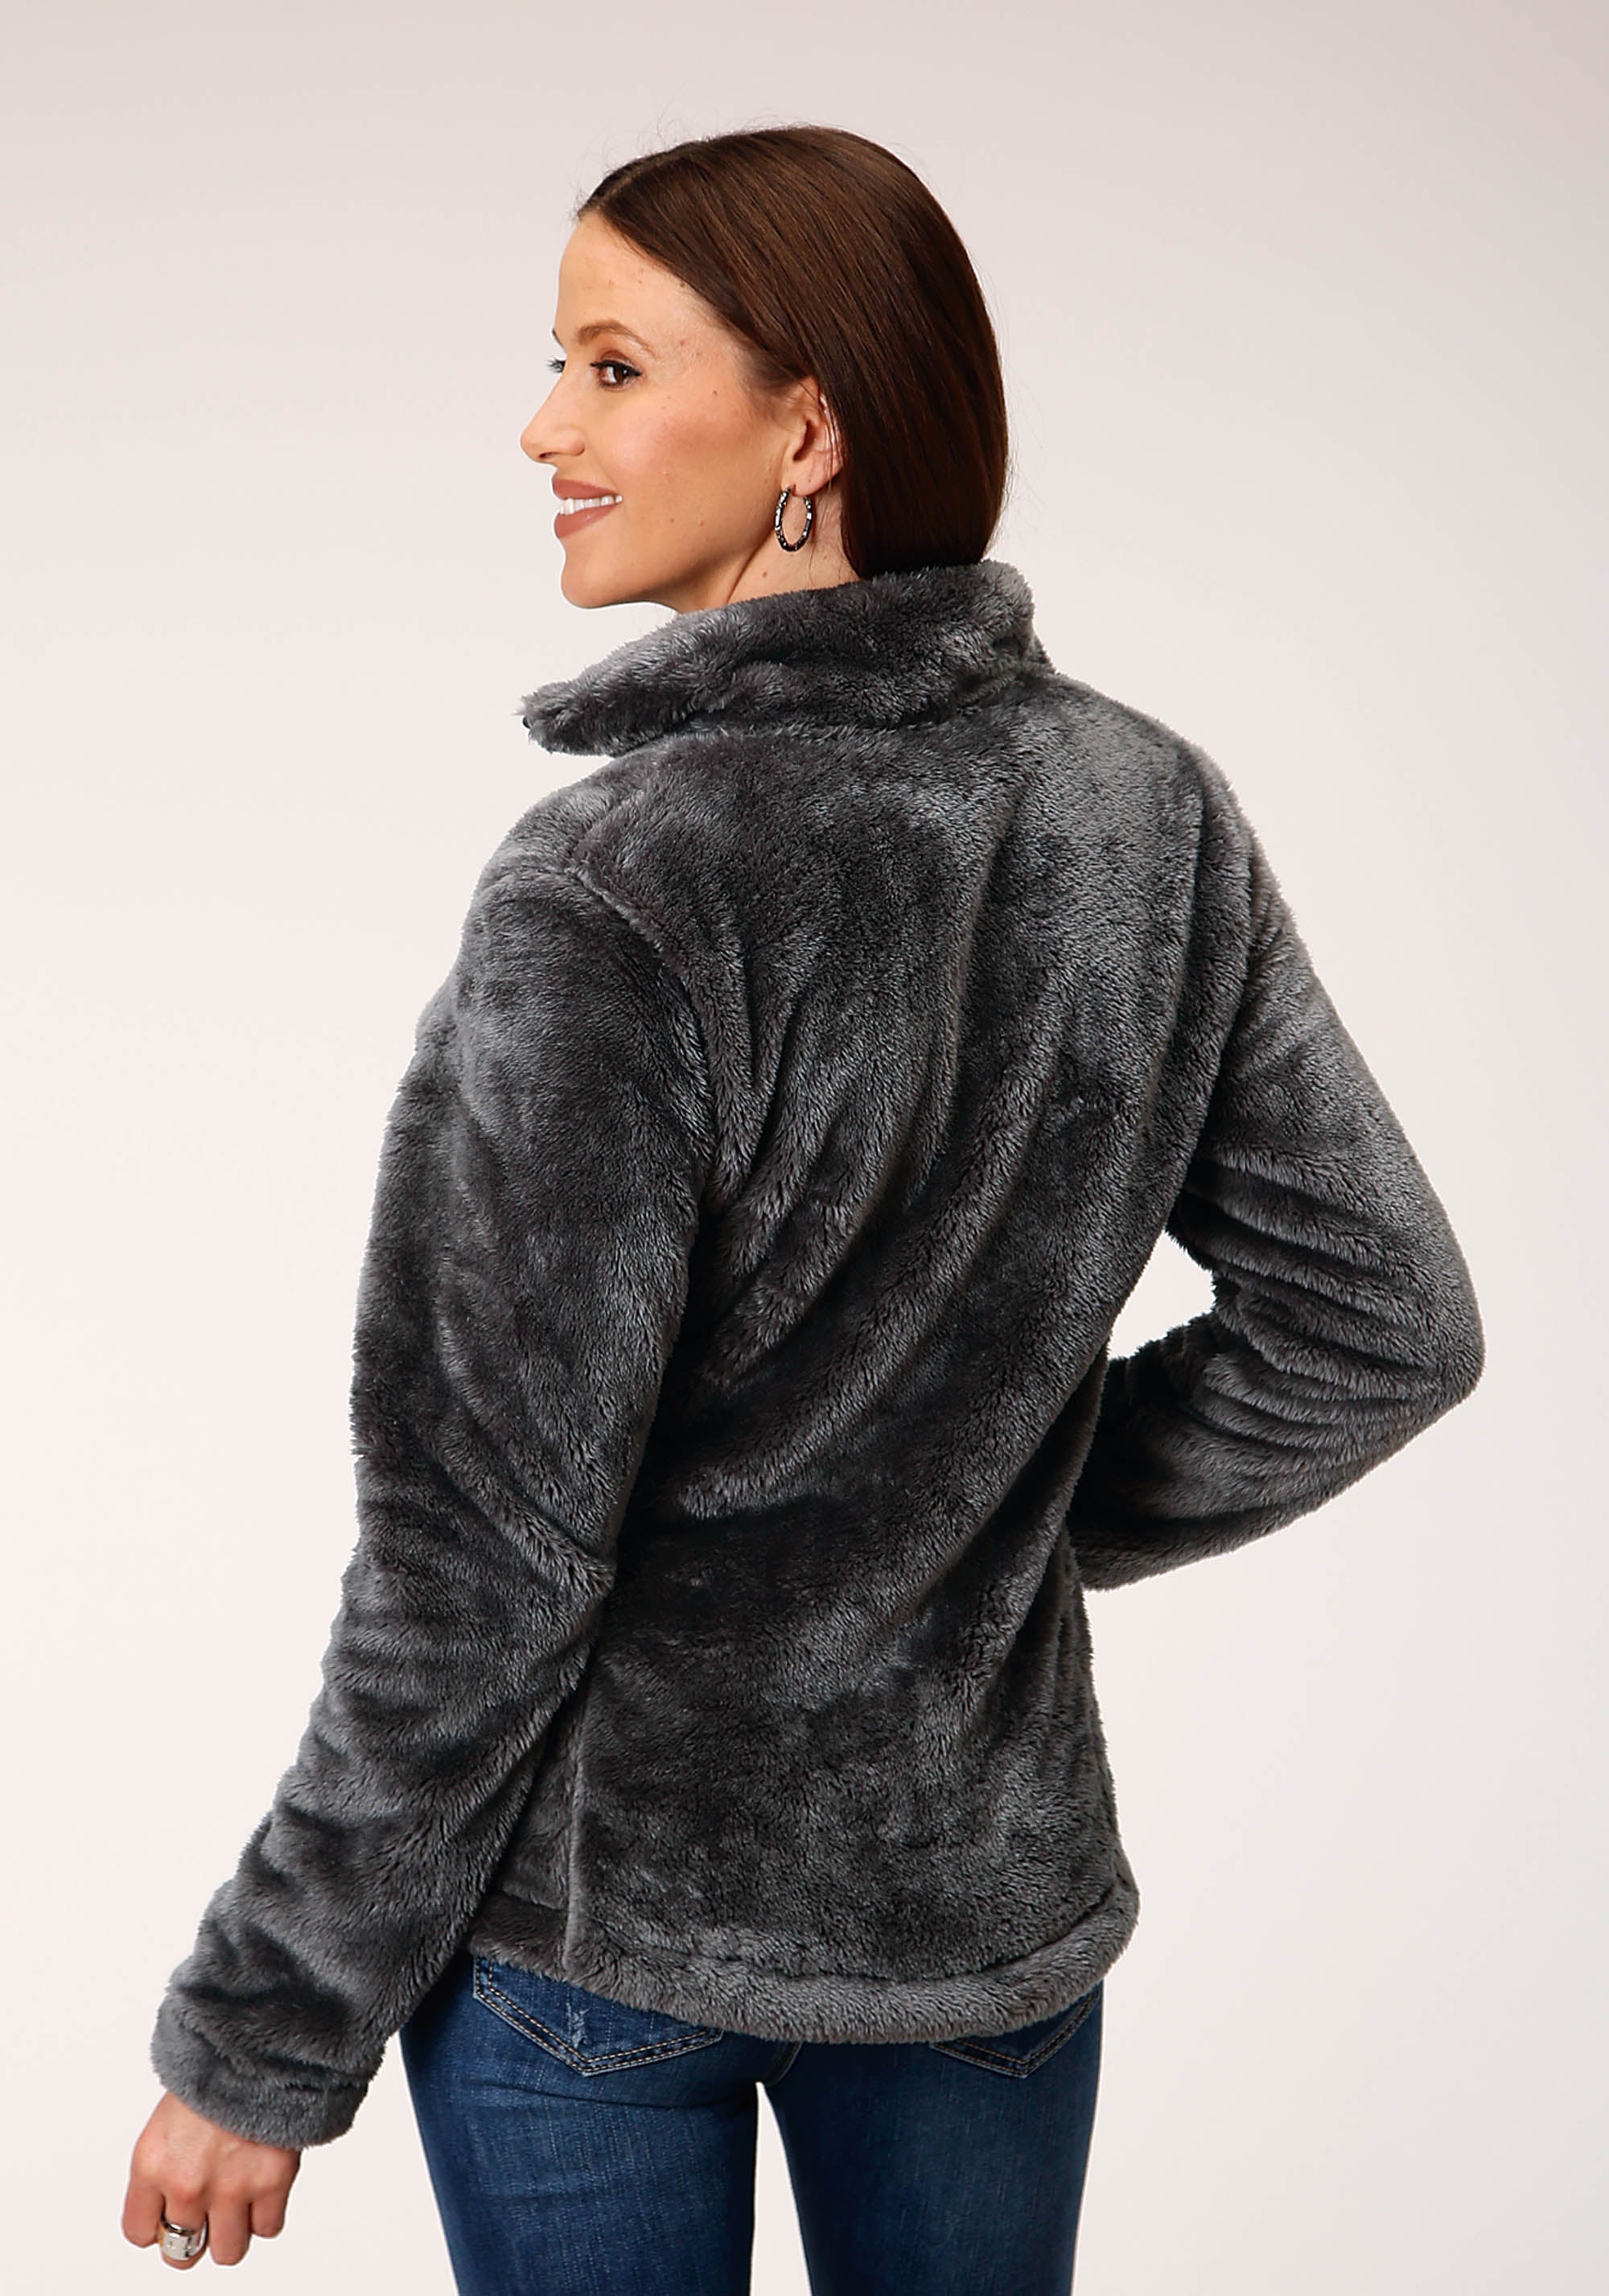 Roper Womens Charcoal Grey 2 Sided Fuzzy Fleece Pullover